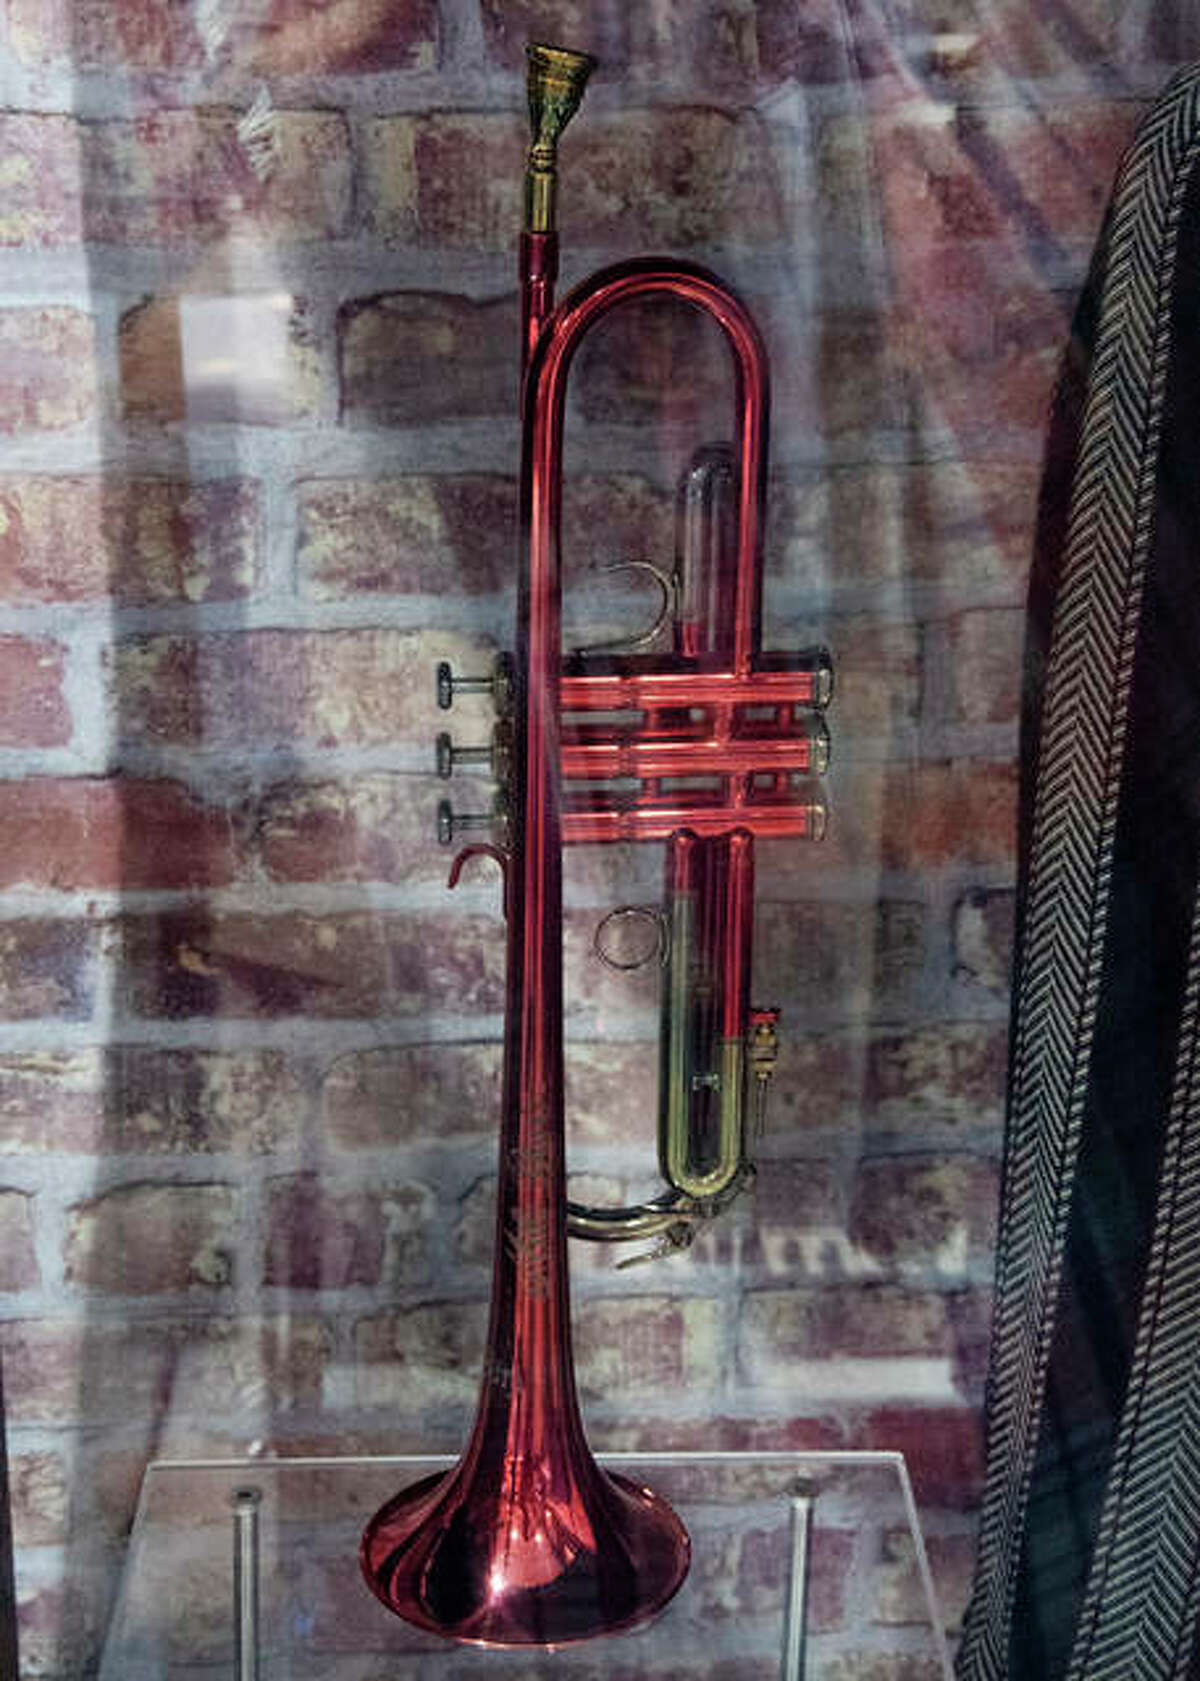 Miles Davis’ custom made red trumpet is part of the “State of Sound: A World of Music from Illinois” exhibit now on display at the Abraham Lincoln Presidential Library and Museum in Springfield. Running through Jan. 23, 2022, the exhibit highlights the long history of musicians from Illinois with artifacts from legends coming from various musical genres, like Chaka Kahn, Howlin’ Wolf, Cheap Trick and Earth, Wind & Fire.